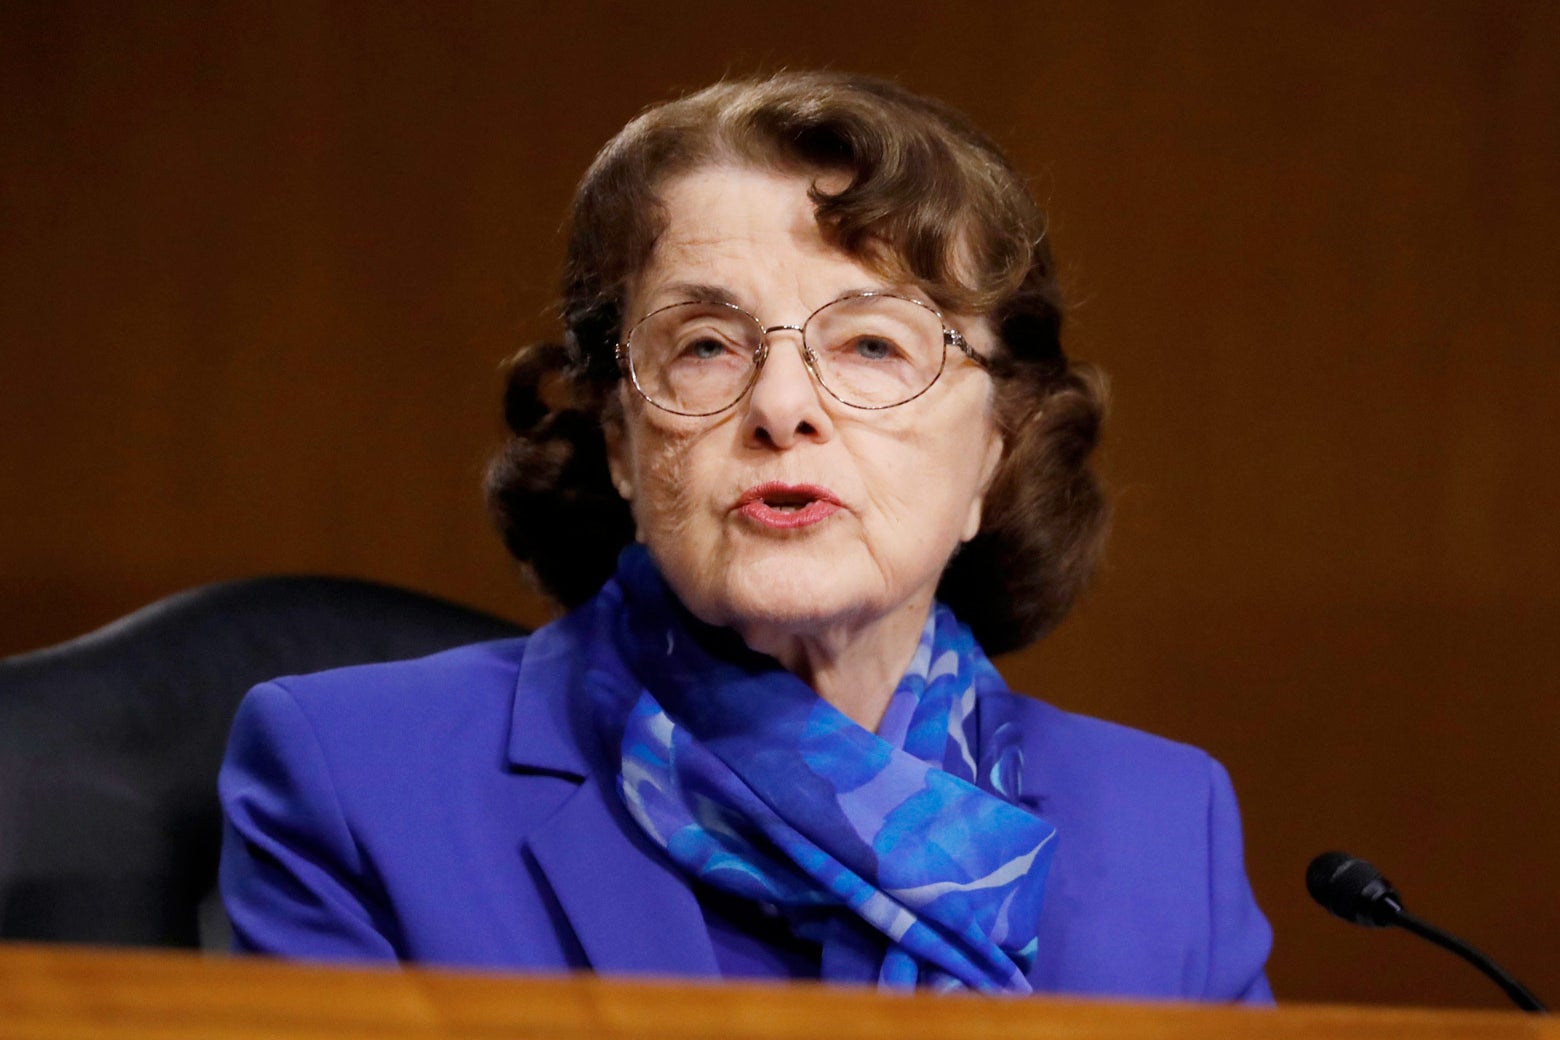 Democrats Deferred to Dianne Feinstein in 2018. They Couldn’t Afford to Do So Again.